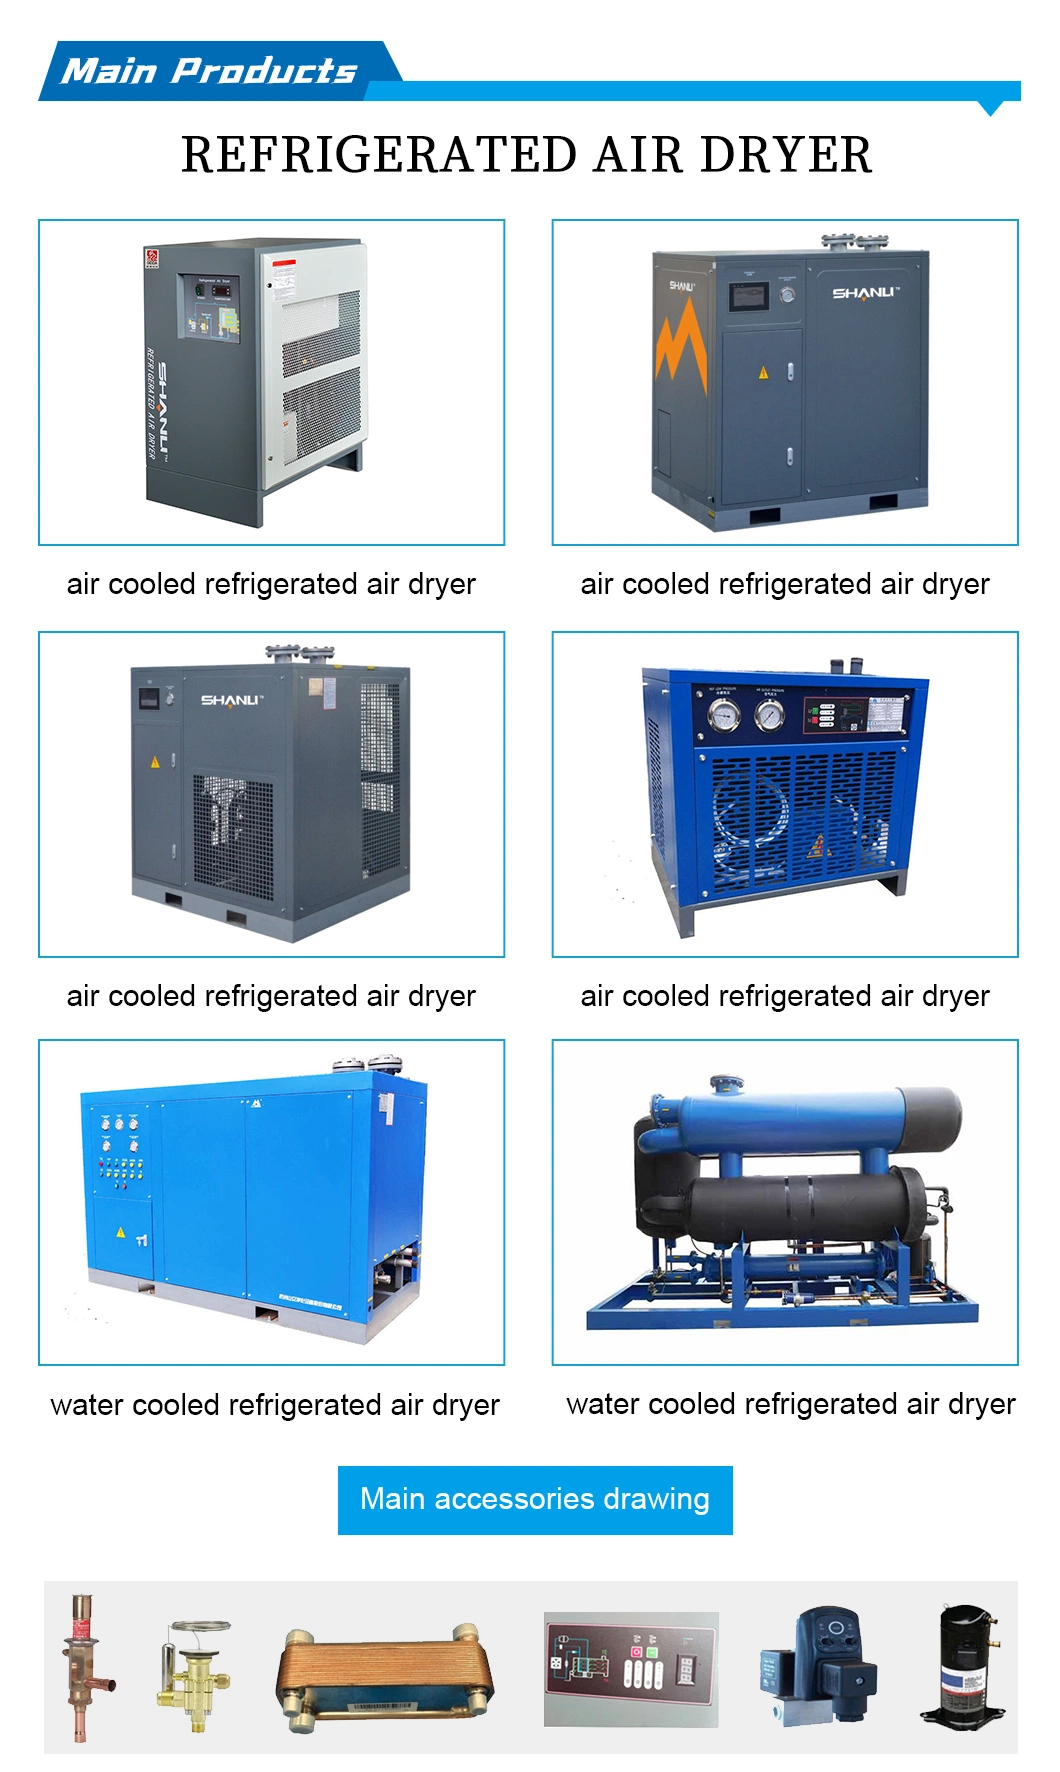 2-10 Dew Point Air Cooled Refrigerated Air Dryer with R134A R407c R410A Refrigerant for Air Compressor 1NF Manufacturer